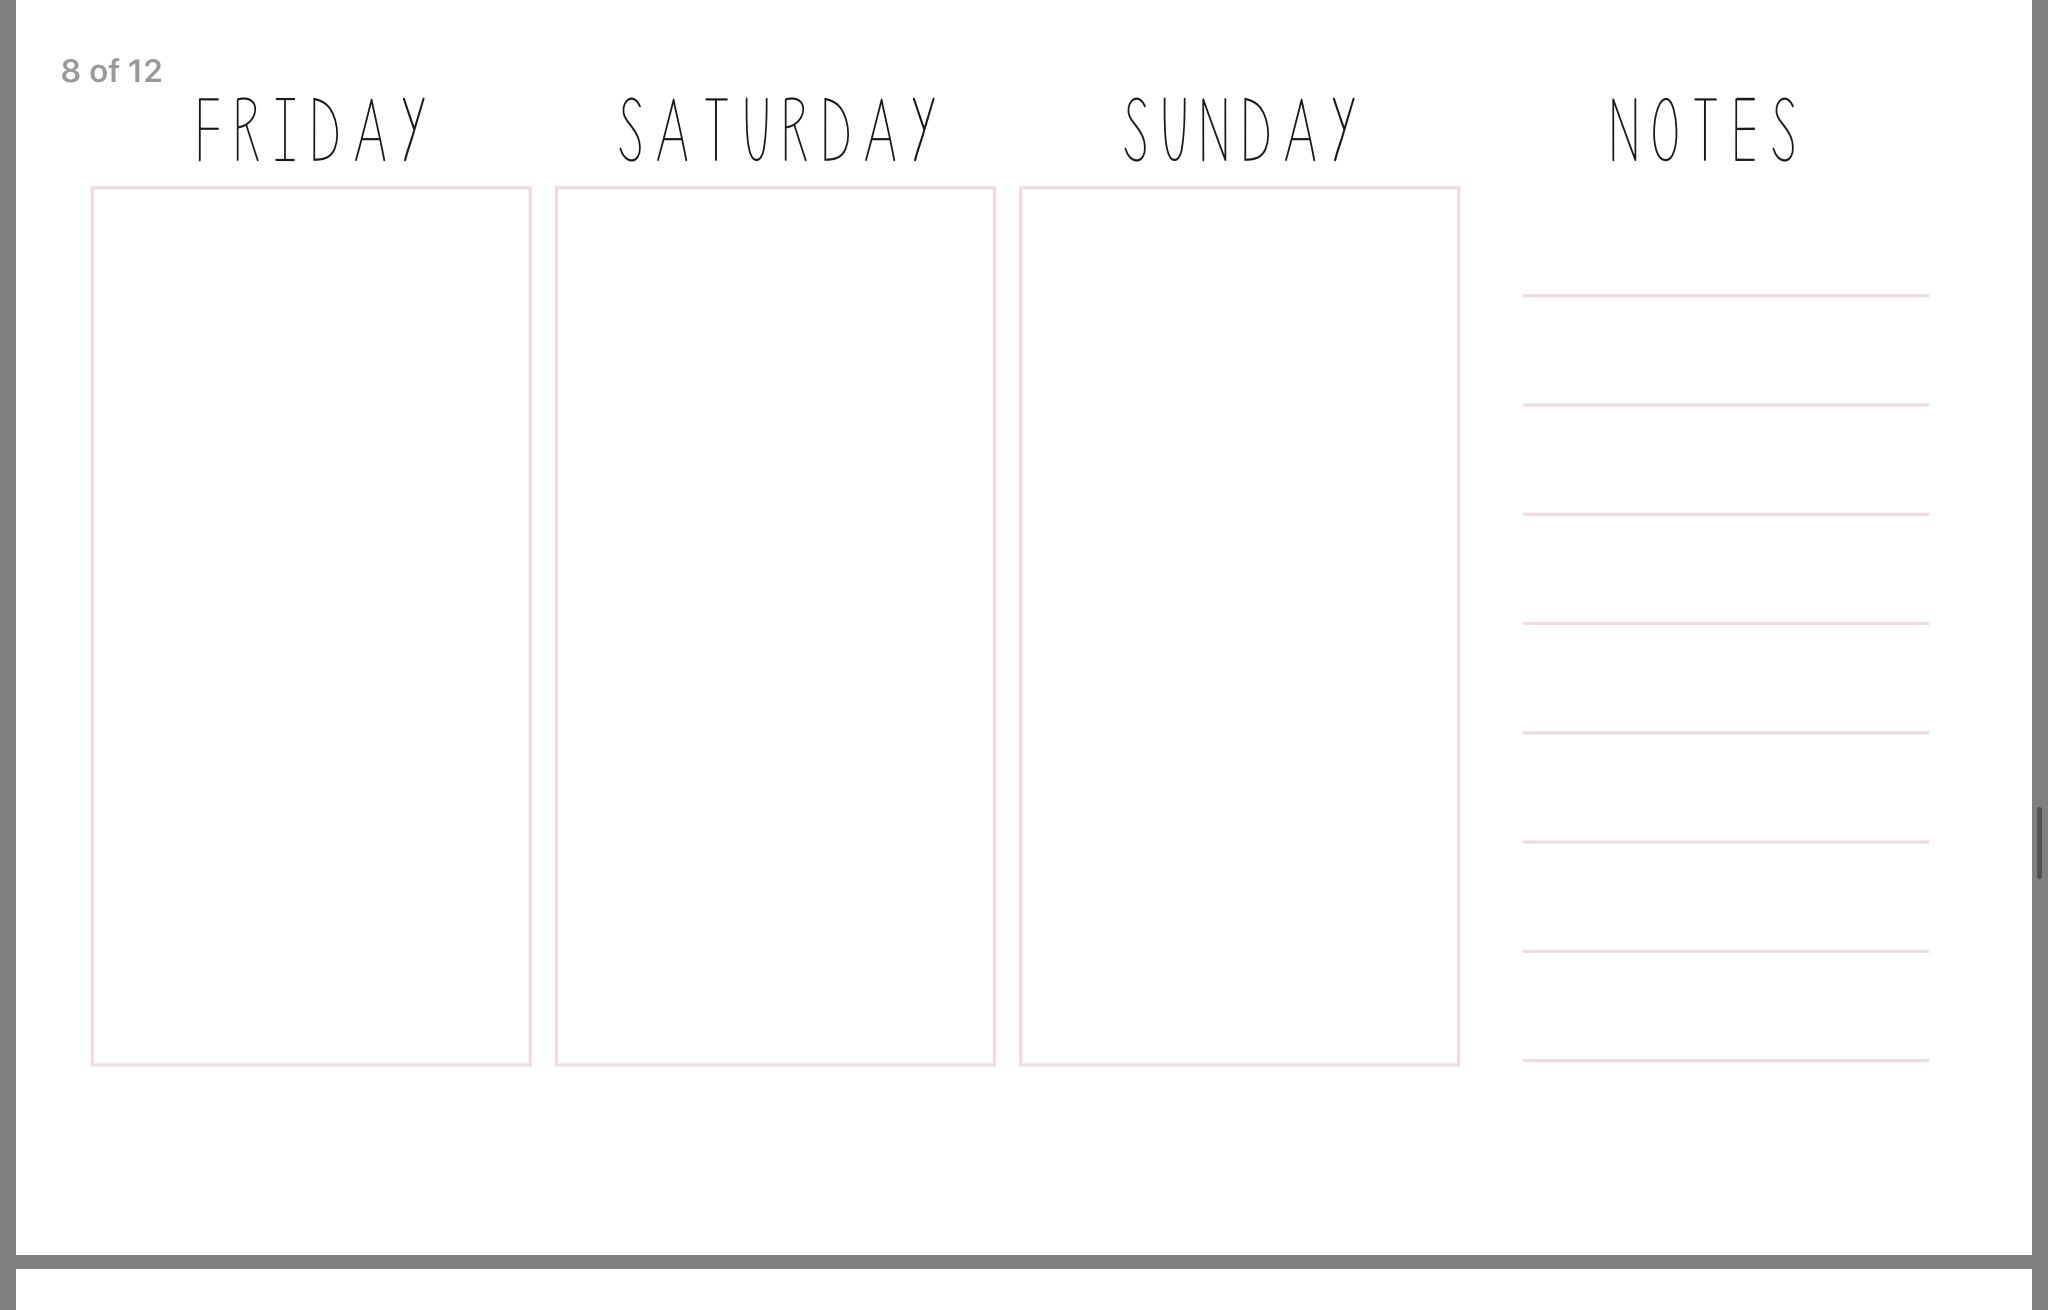 saturday to friday calendar template 46